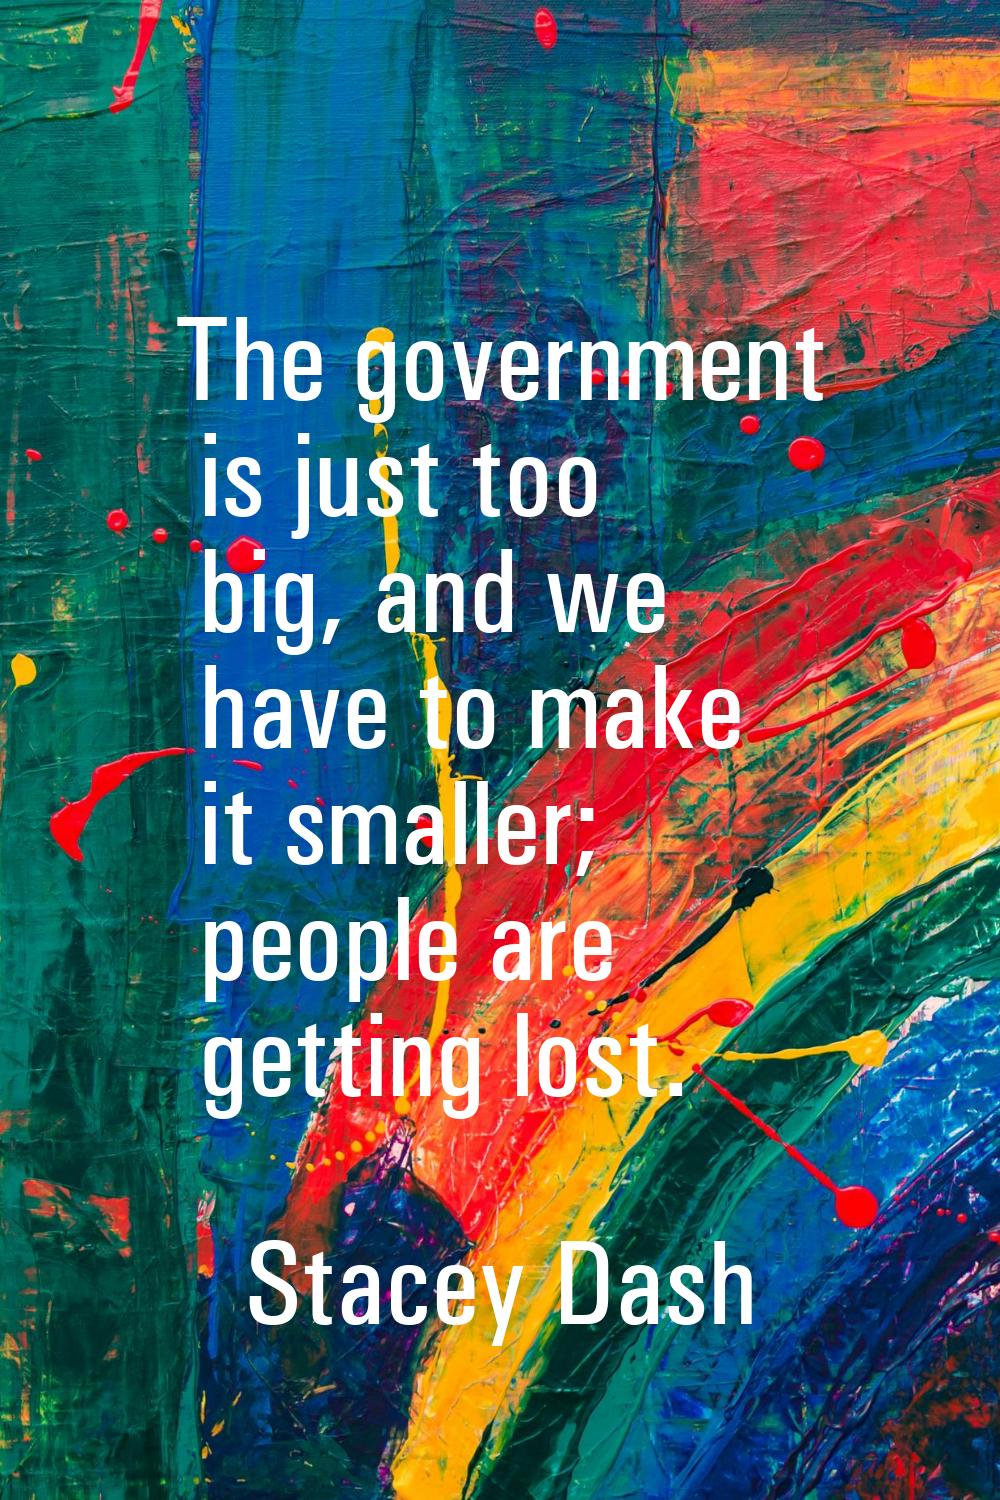 The government is just too big, and we have to make it smaller; people are getting lost.